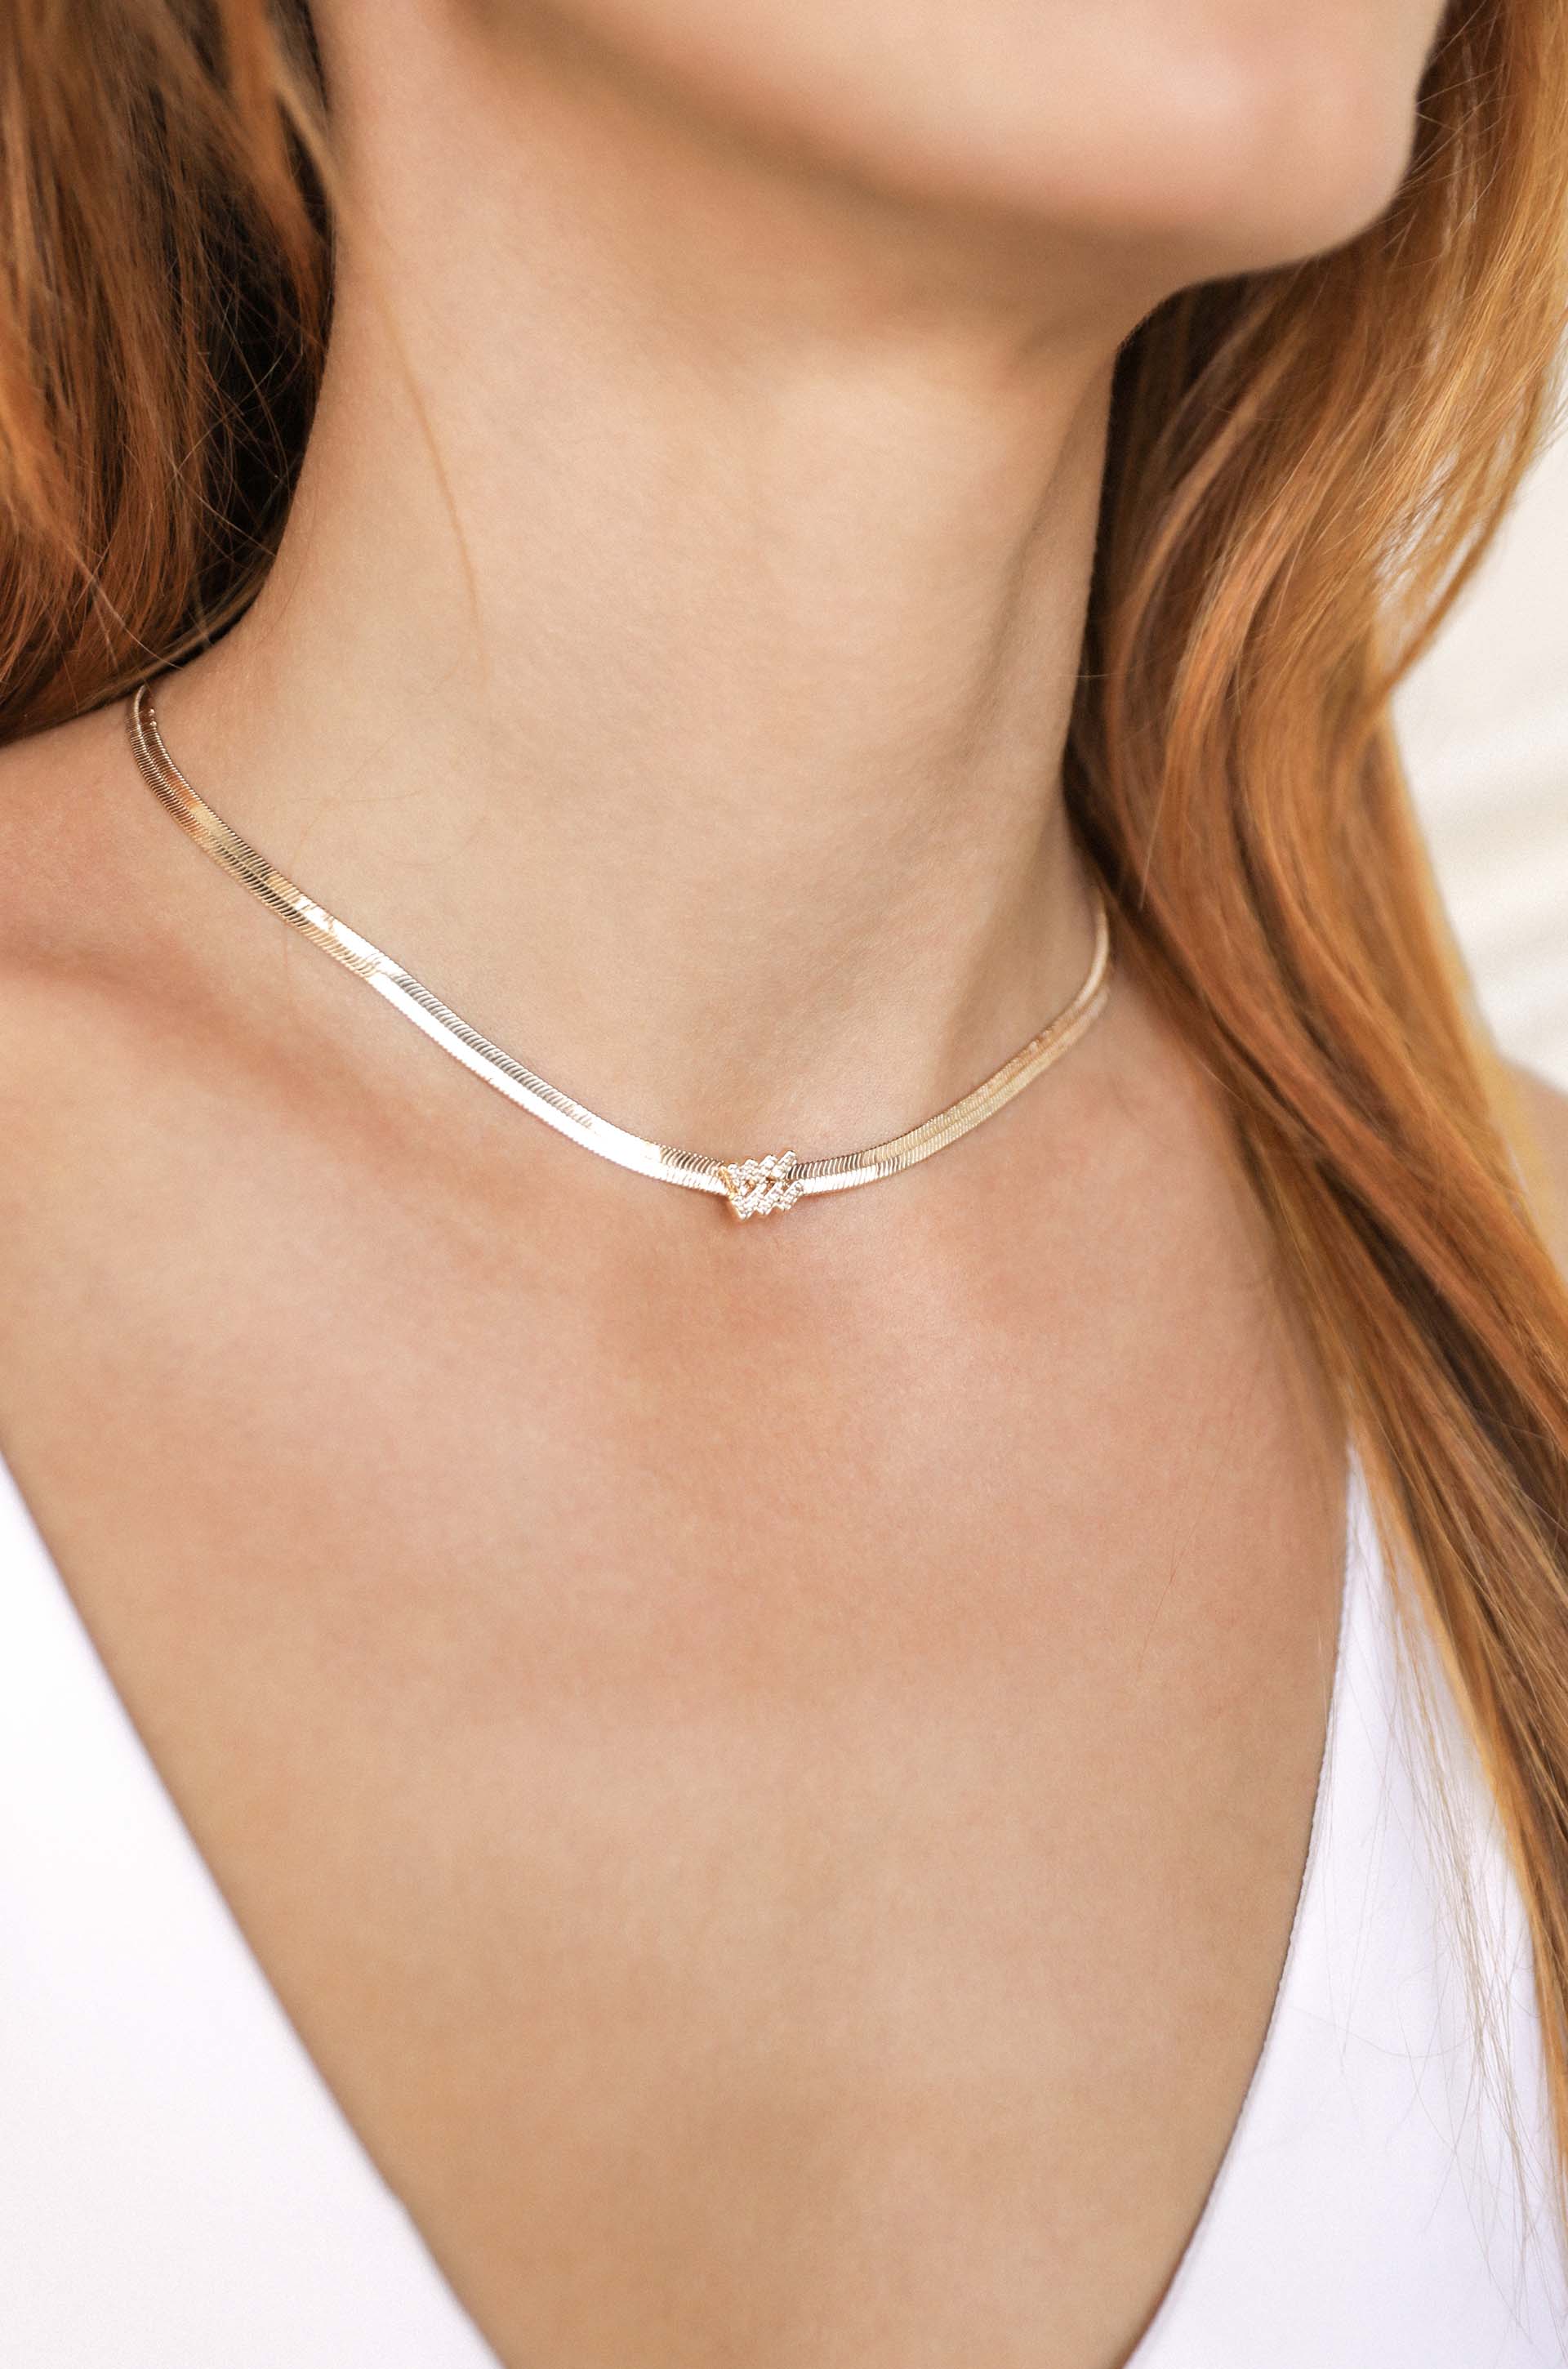 Forever Young Choker Necklace